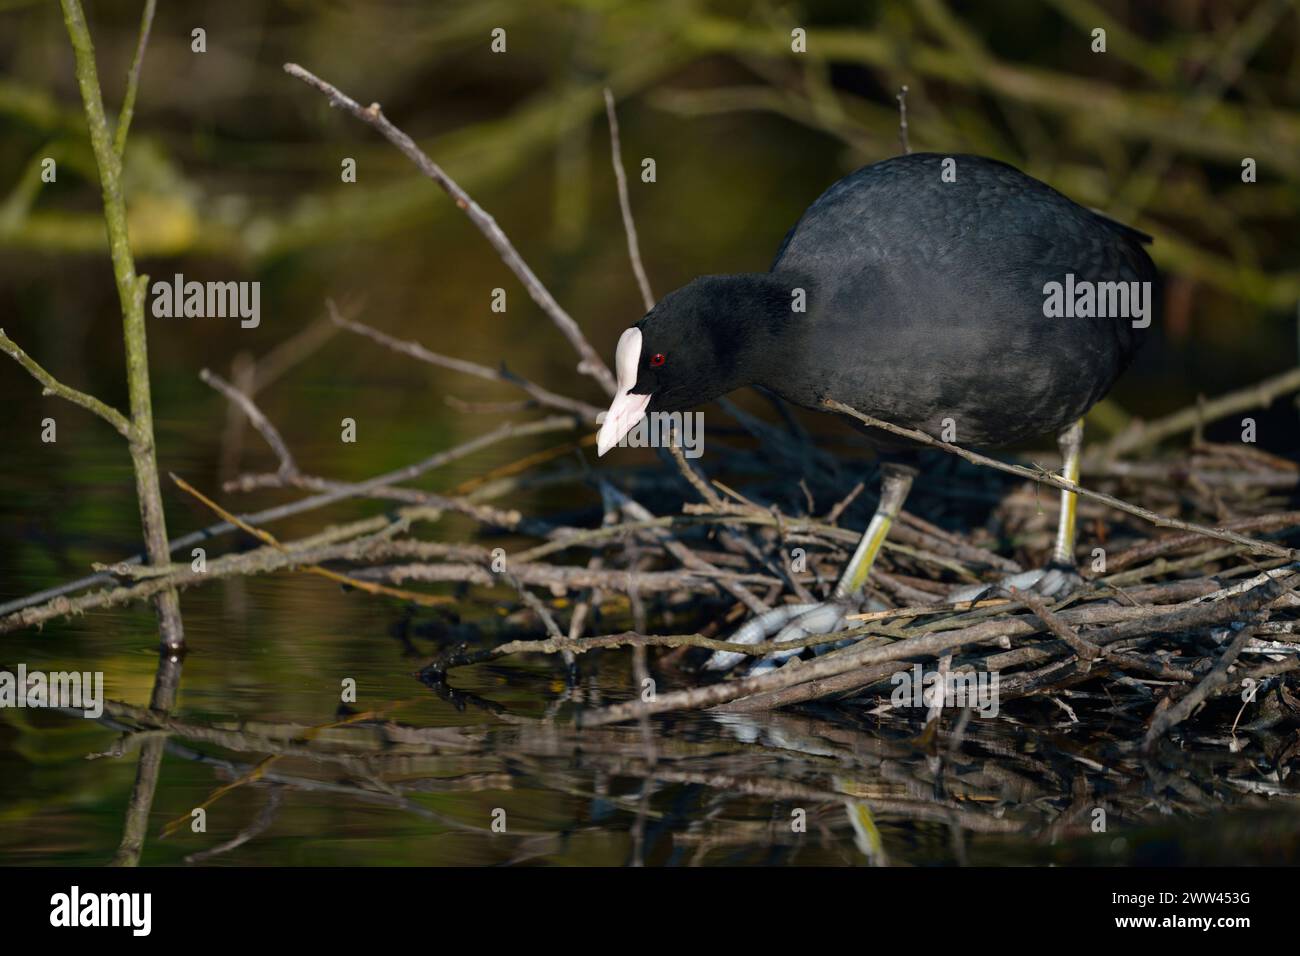 Black Coot / Coot / Eurasian Coot ( Fulica atra ) building its nest, nesting, nest construction under bushes near the water's edge, wildlife, Europe. Stock Photo